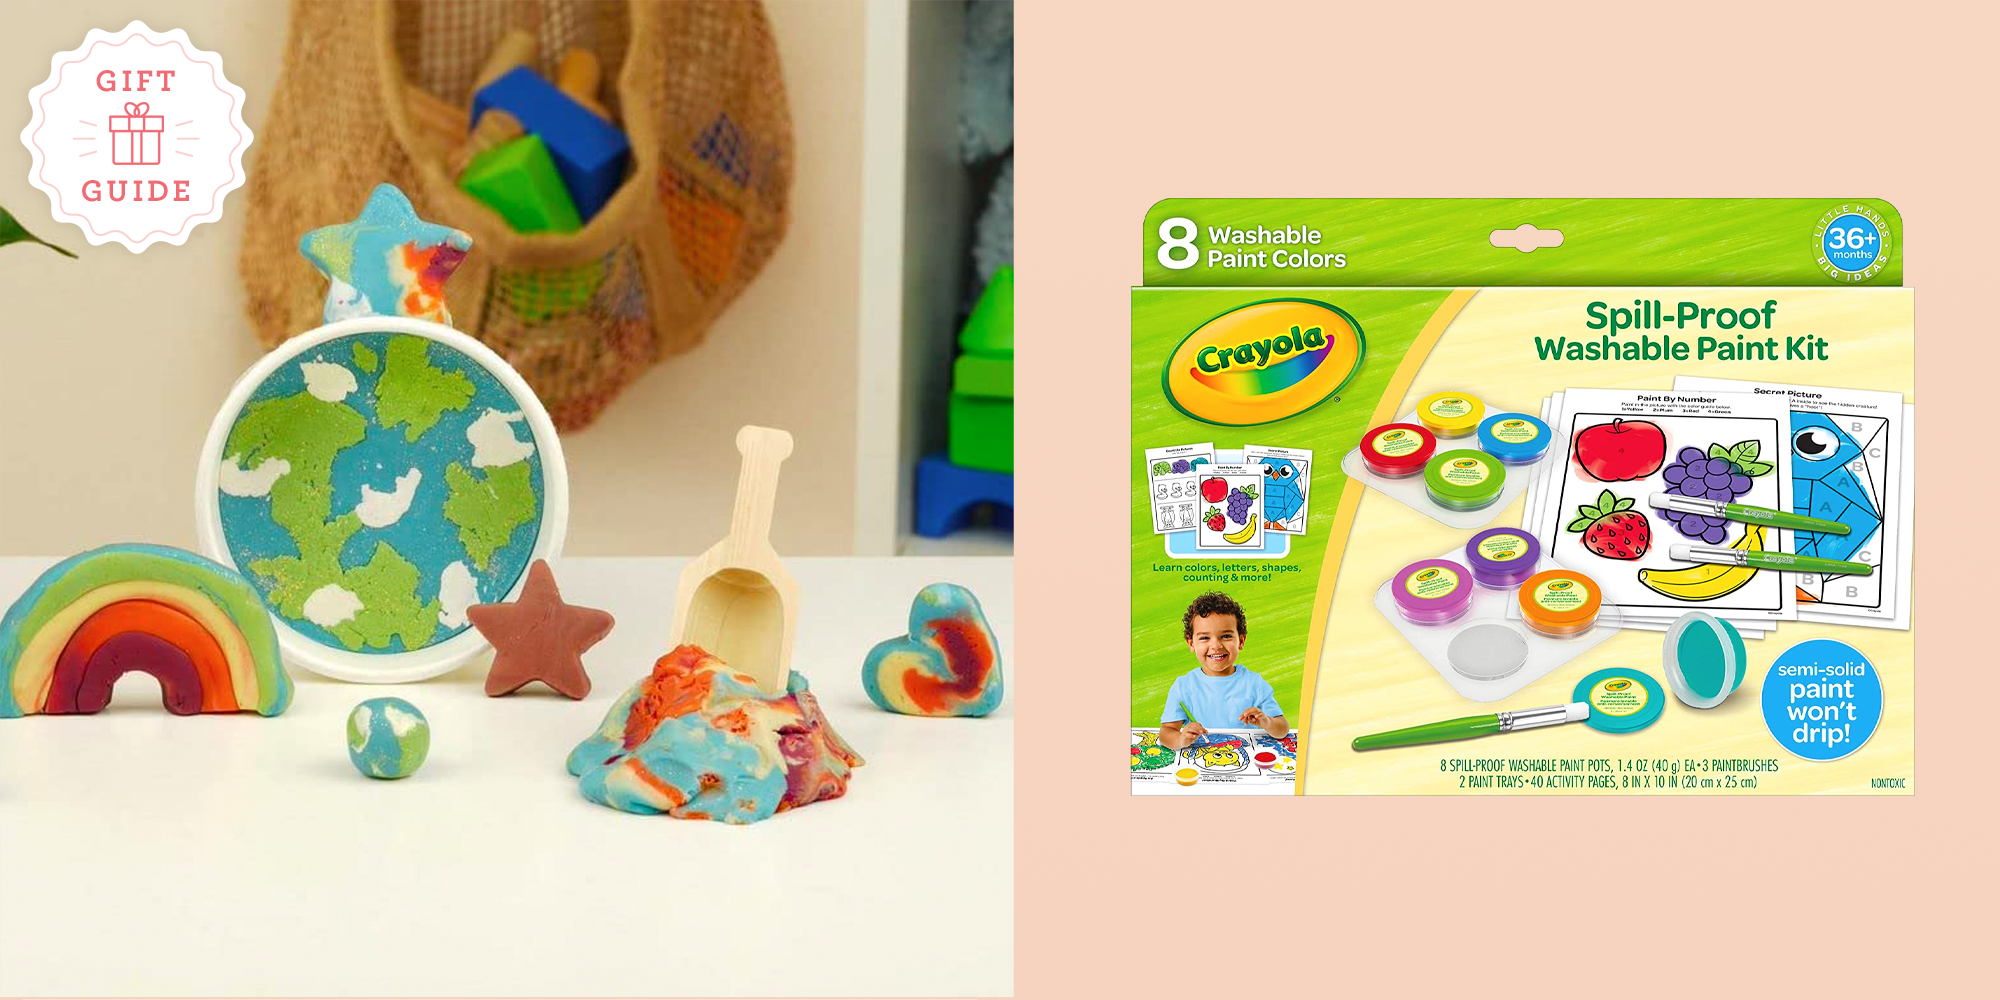 Kidtastic Dinosaur Construct & Play Gift For 3-Year-Old Boys